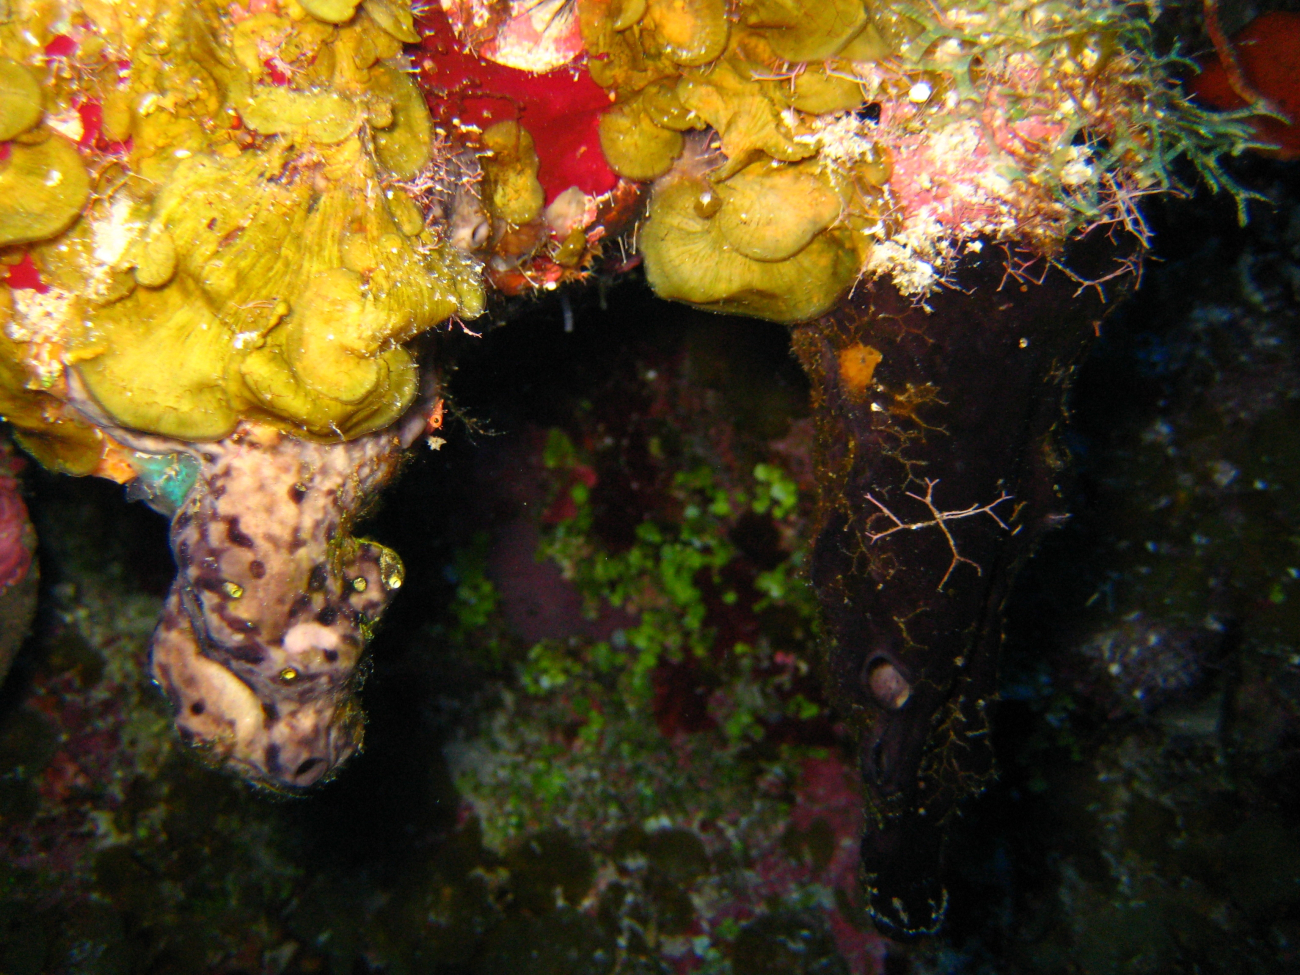 Yellow sponge, green and red algae, small purple fish - a kaleidoscopicview of a vertical wall